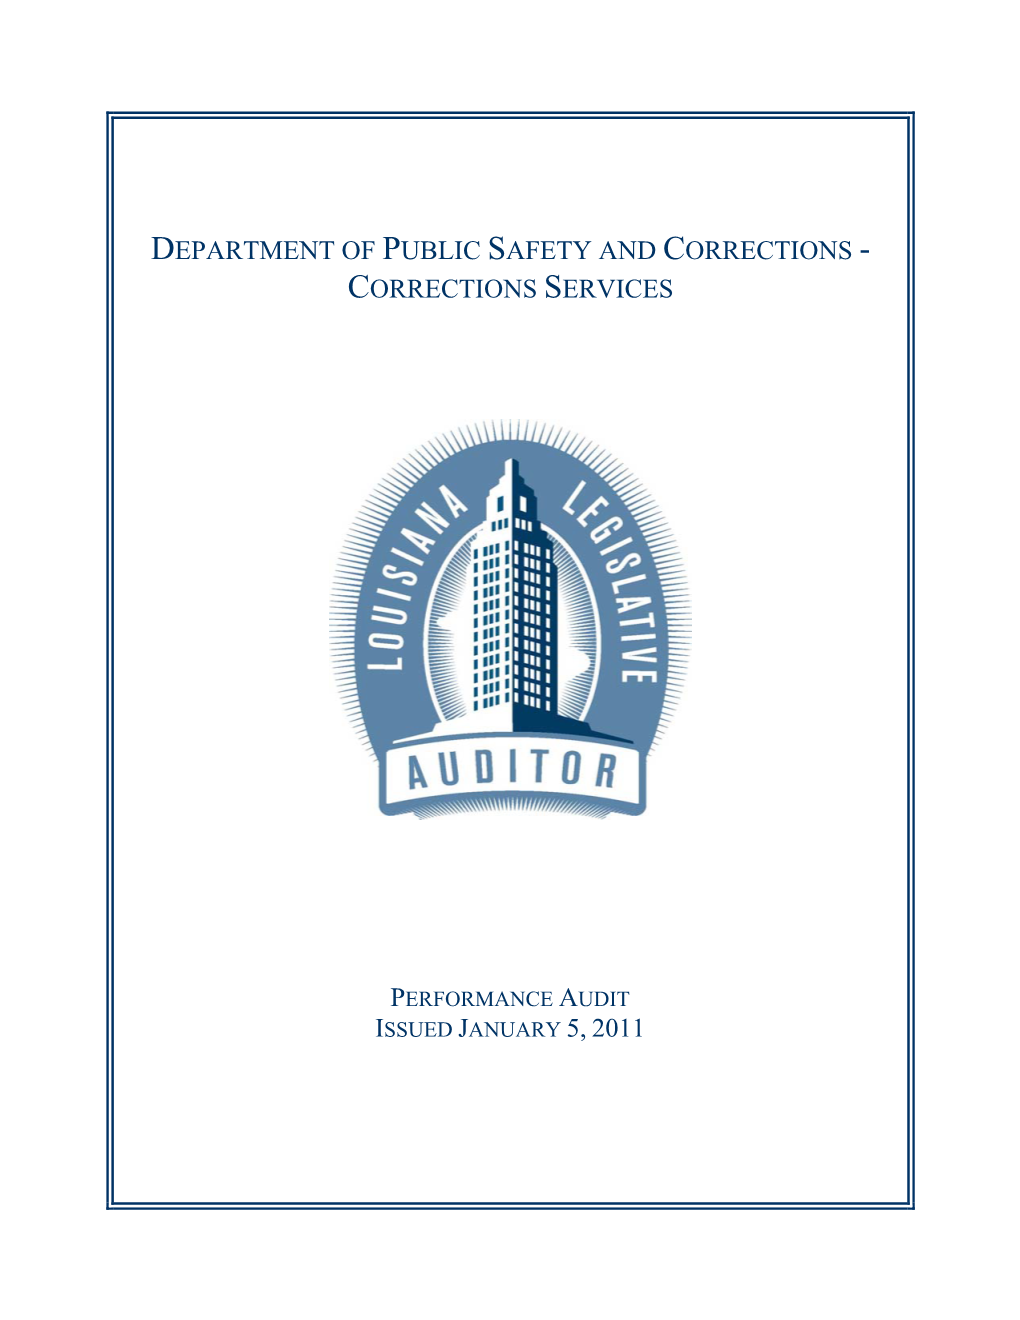 Dept. of Public Safety & Corrections/Correction Services